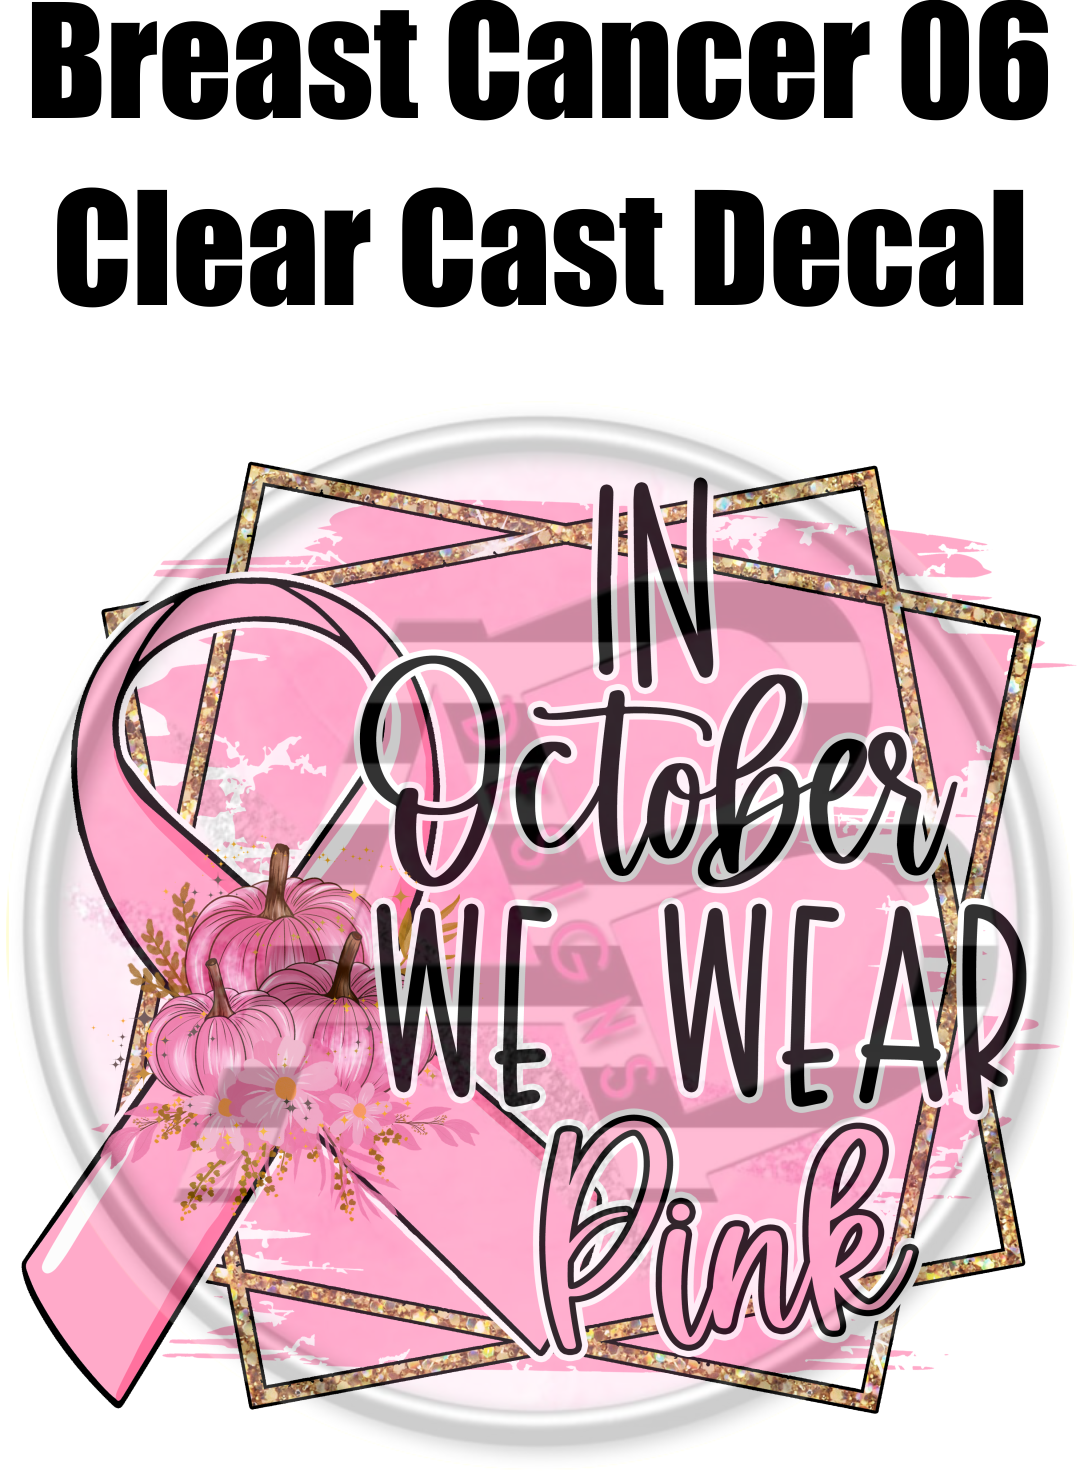 Breast Cancer 06 - Clear Cast Decal